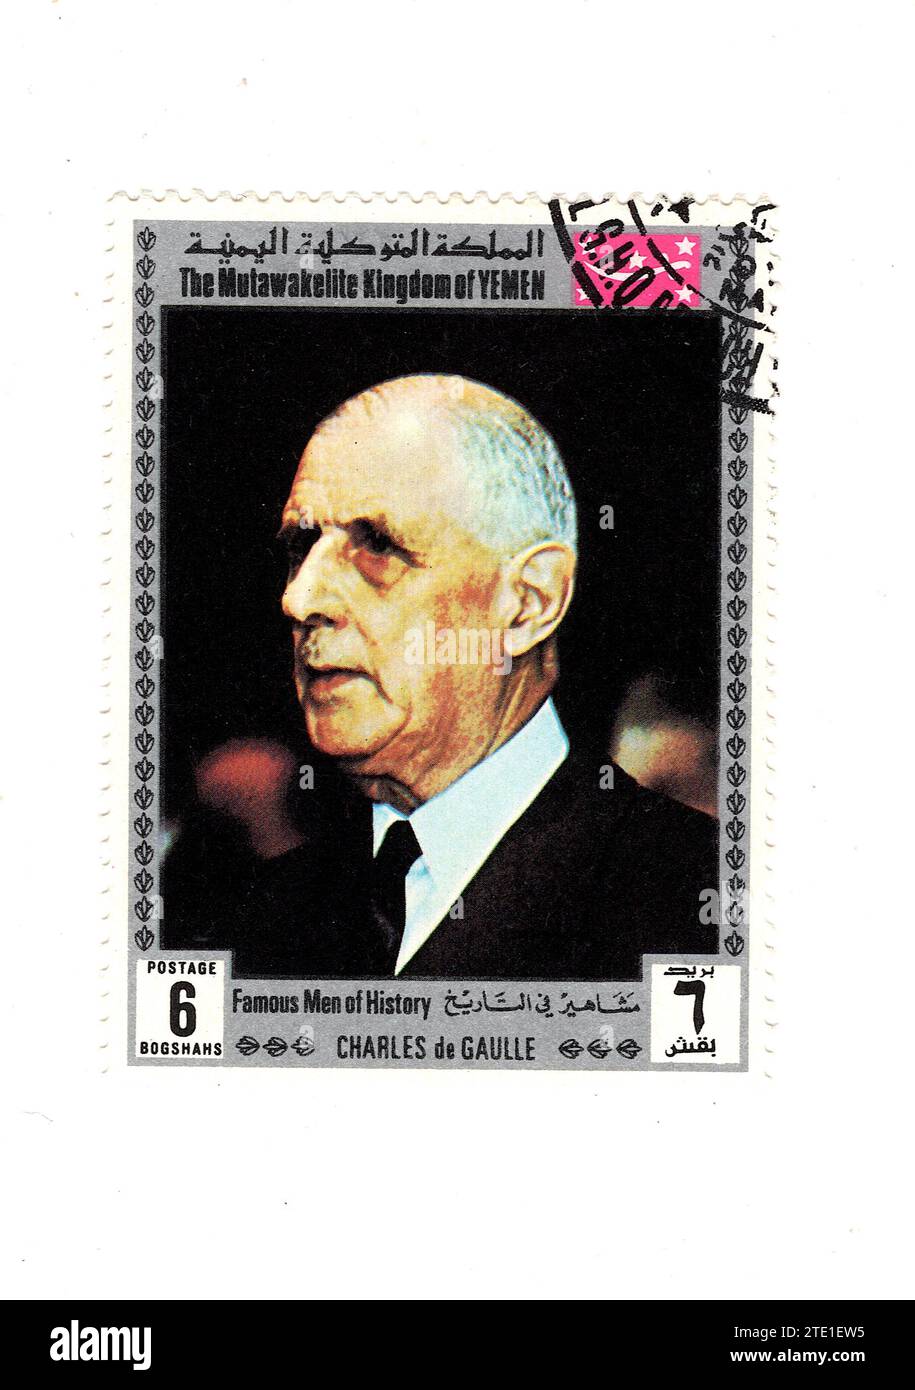 A vintage postage stamp from Yemen featuring a portrait of Charles de Gaulle isolated on a white background. Stock Photo